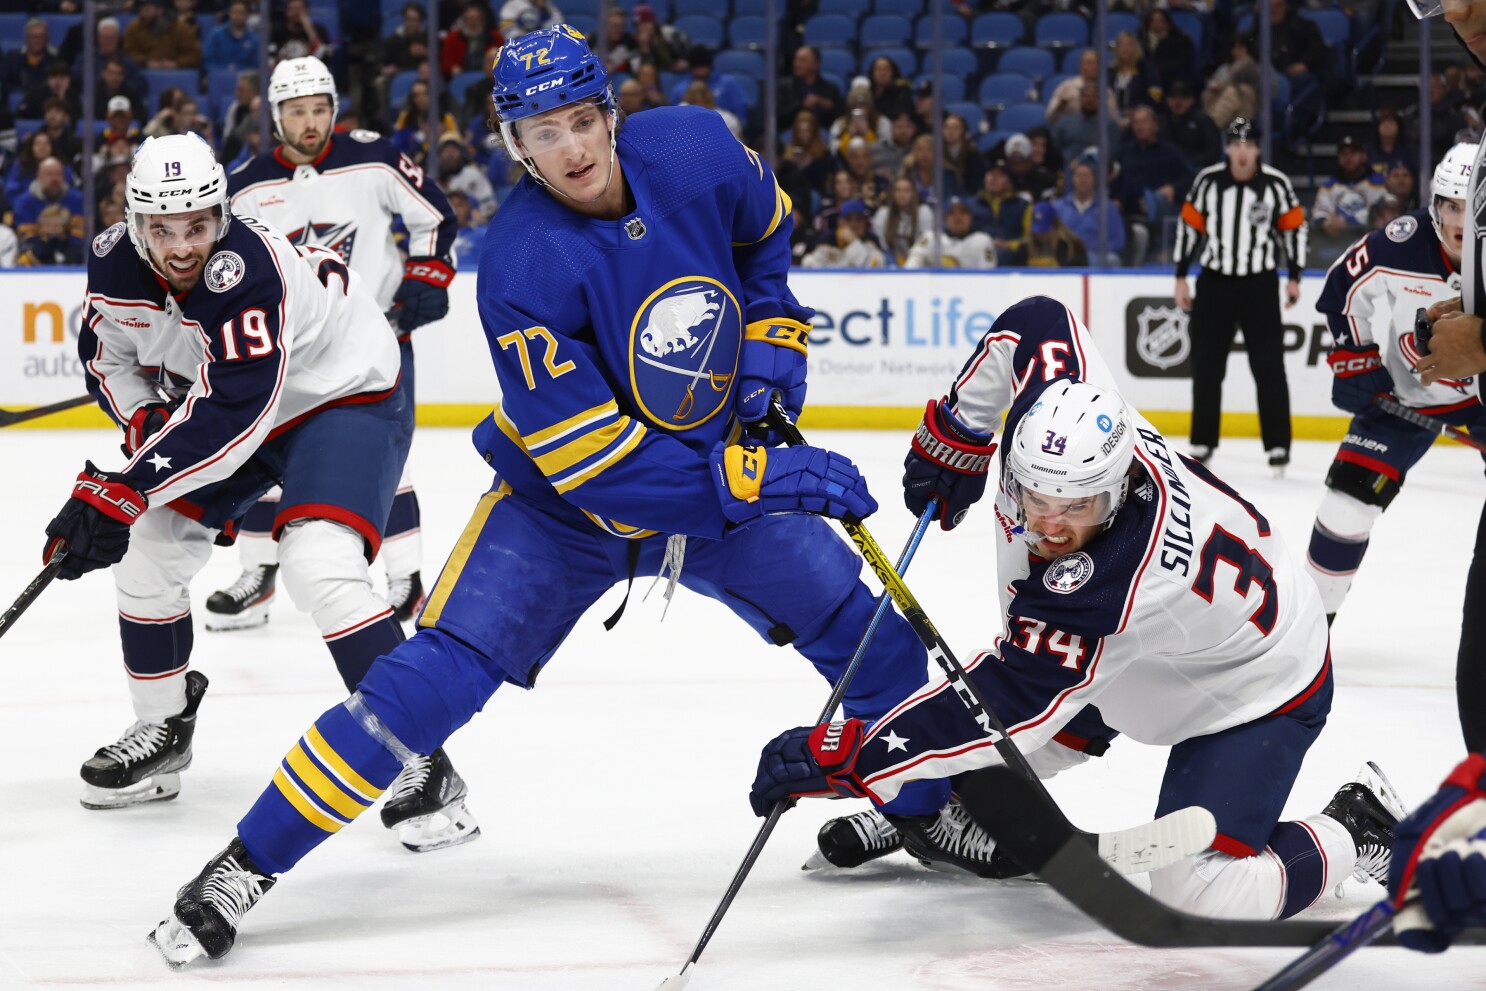 Rasmus Dahlin replaces Buffalo Sabres teammate Tage Thompson at NHL  All-Star Game - Daily Faceoff